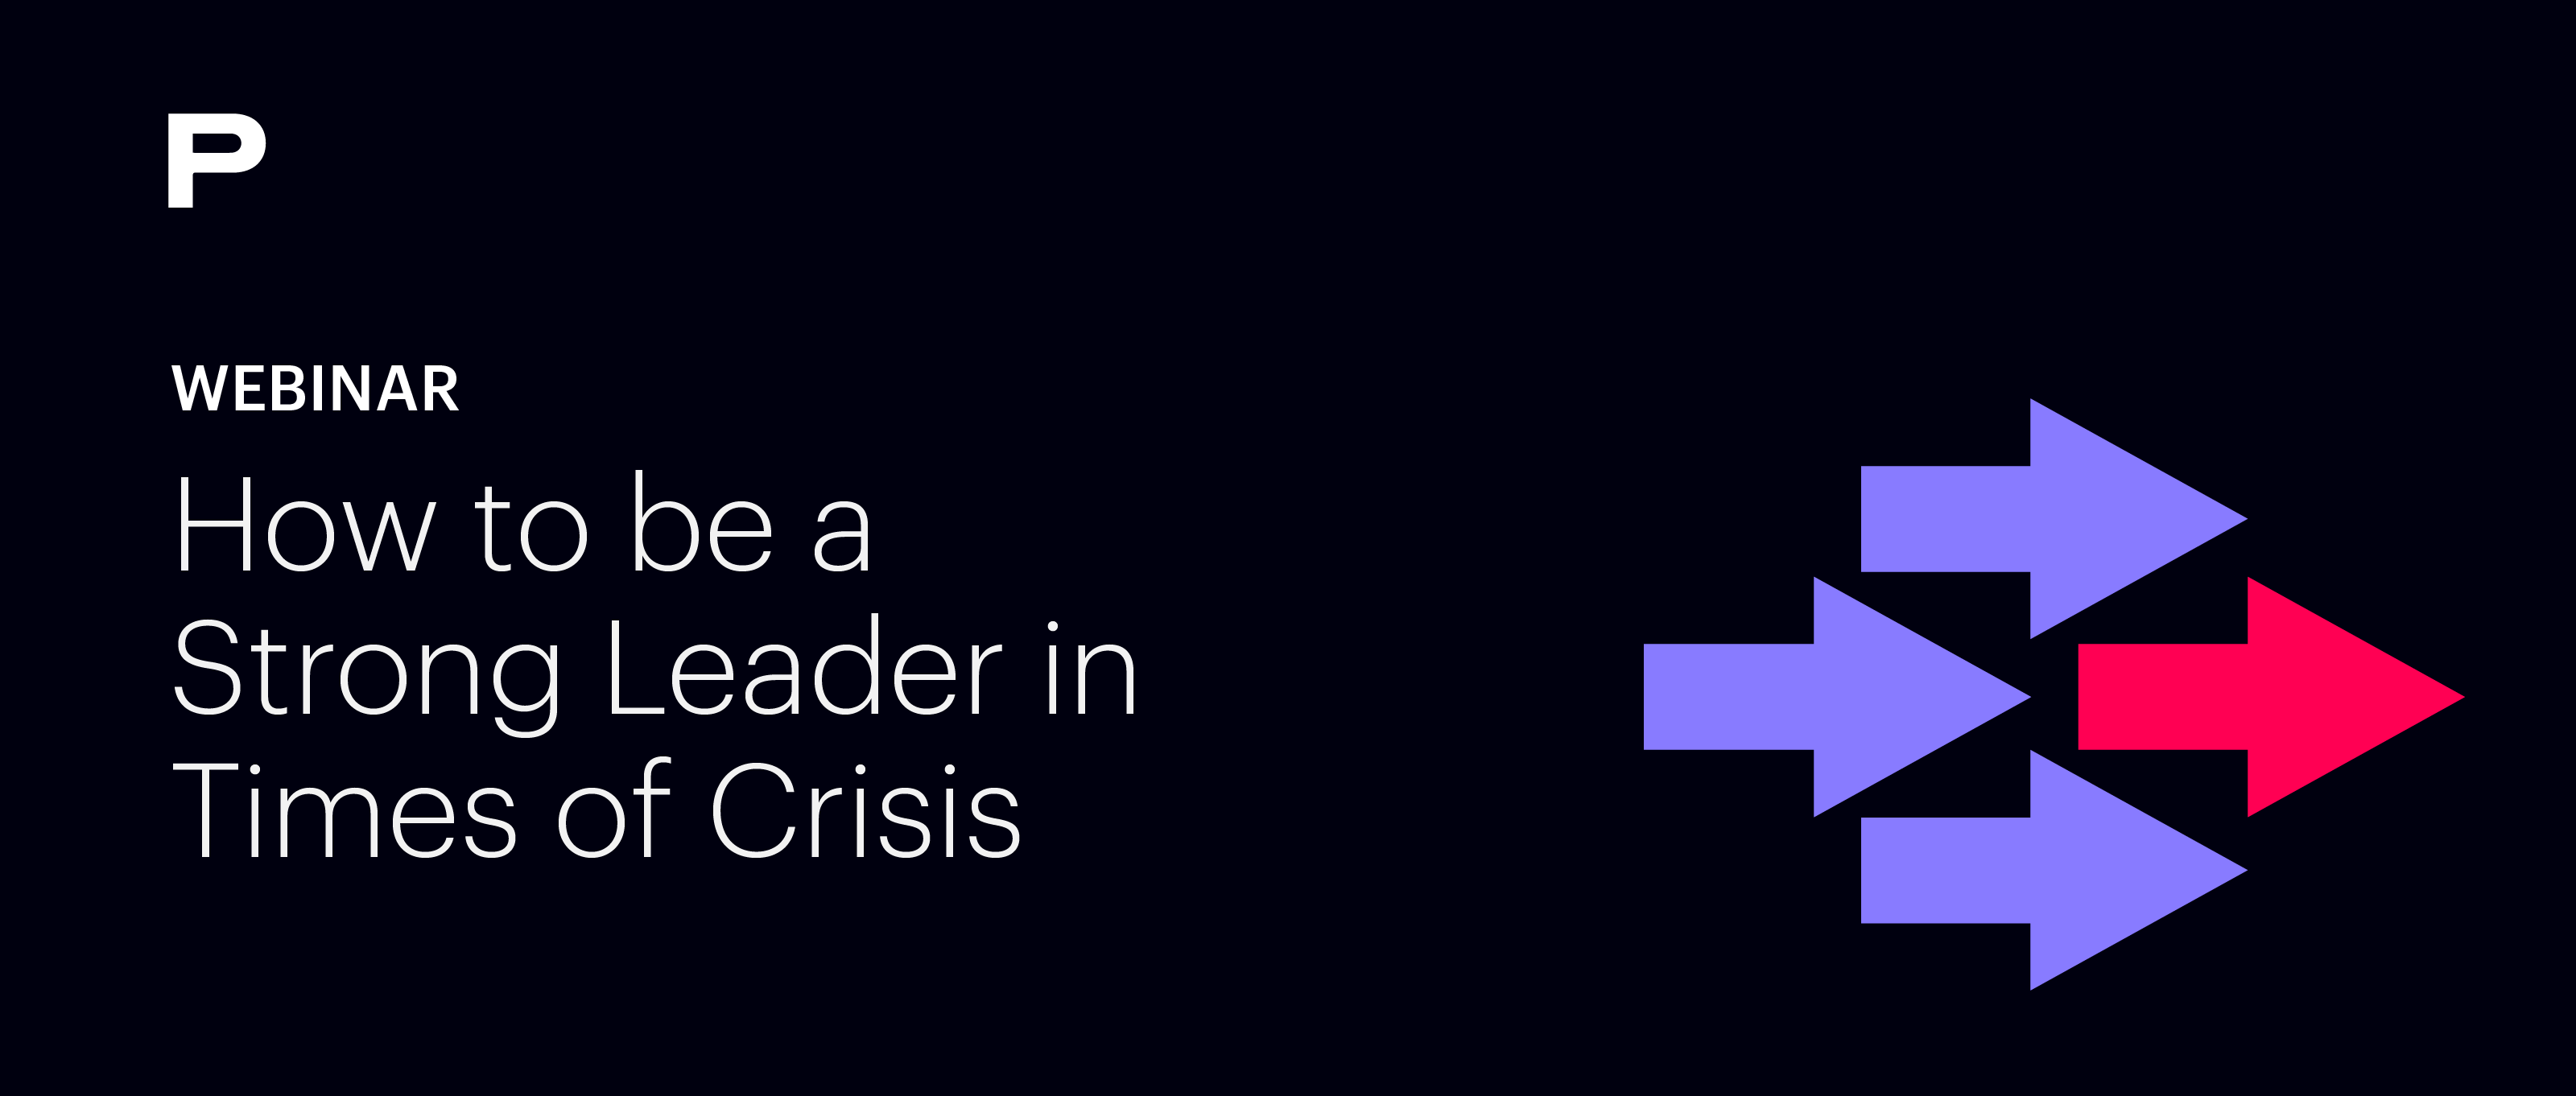 Webinar: How to be a Strong Leader in the Times of Crisis